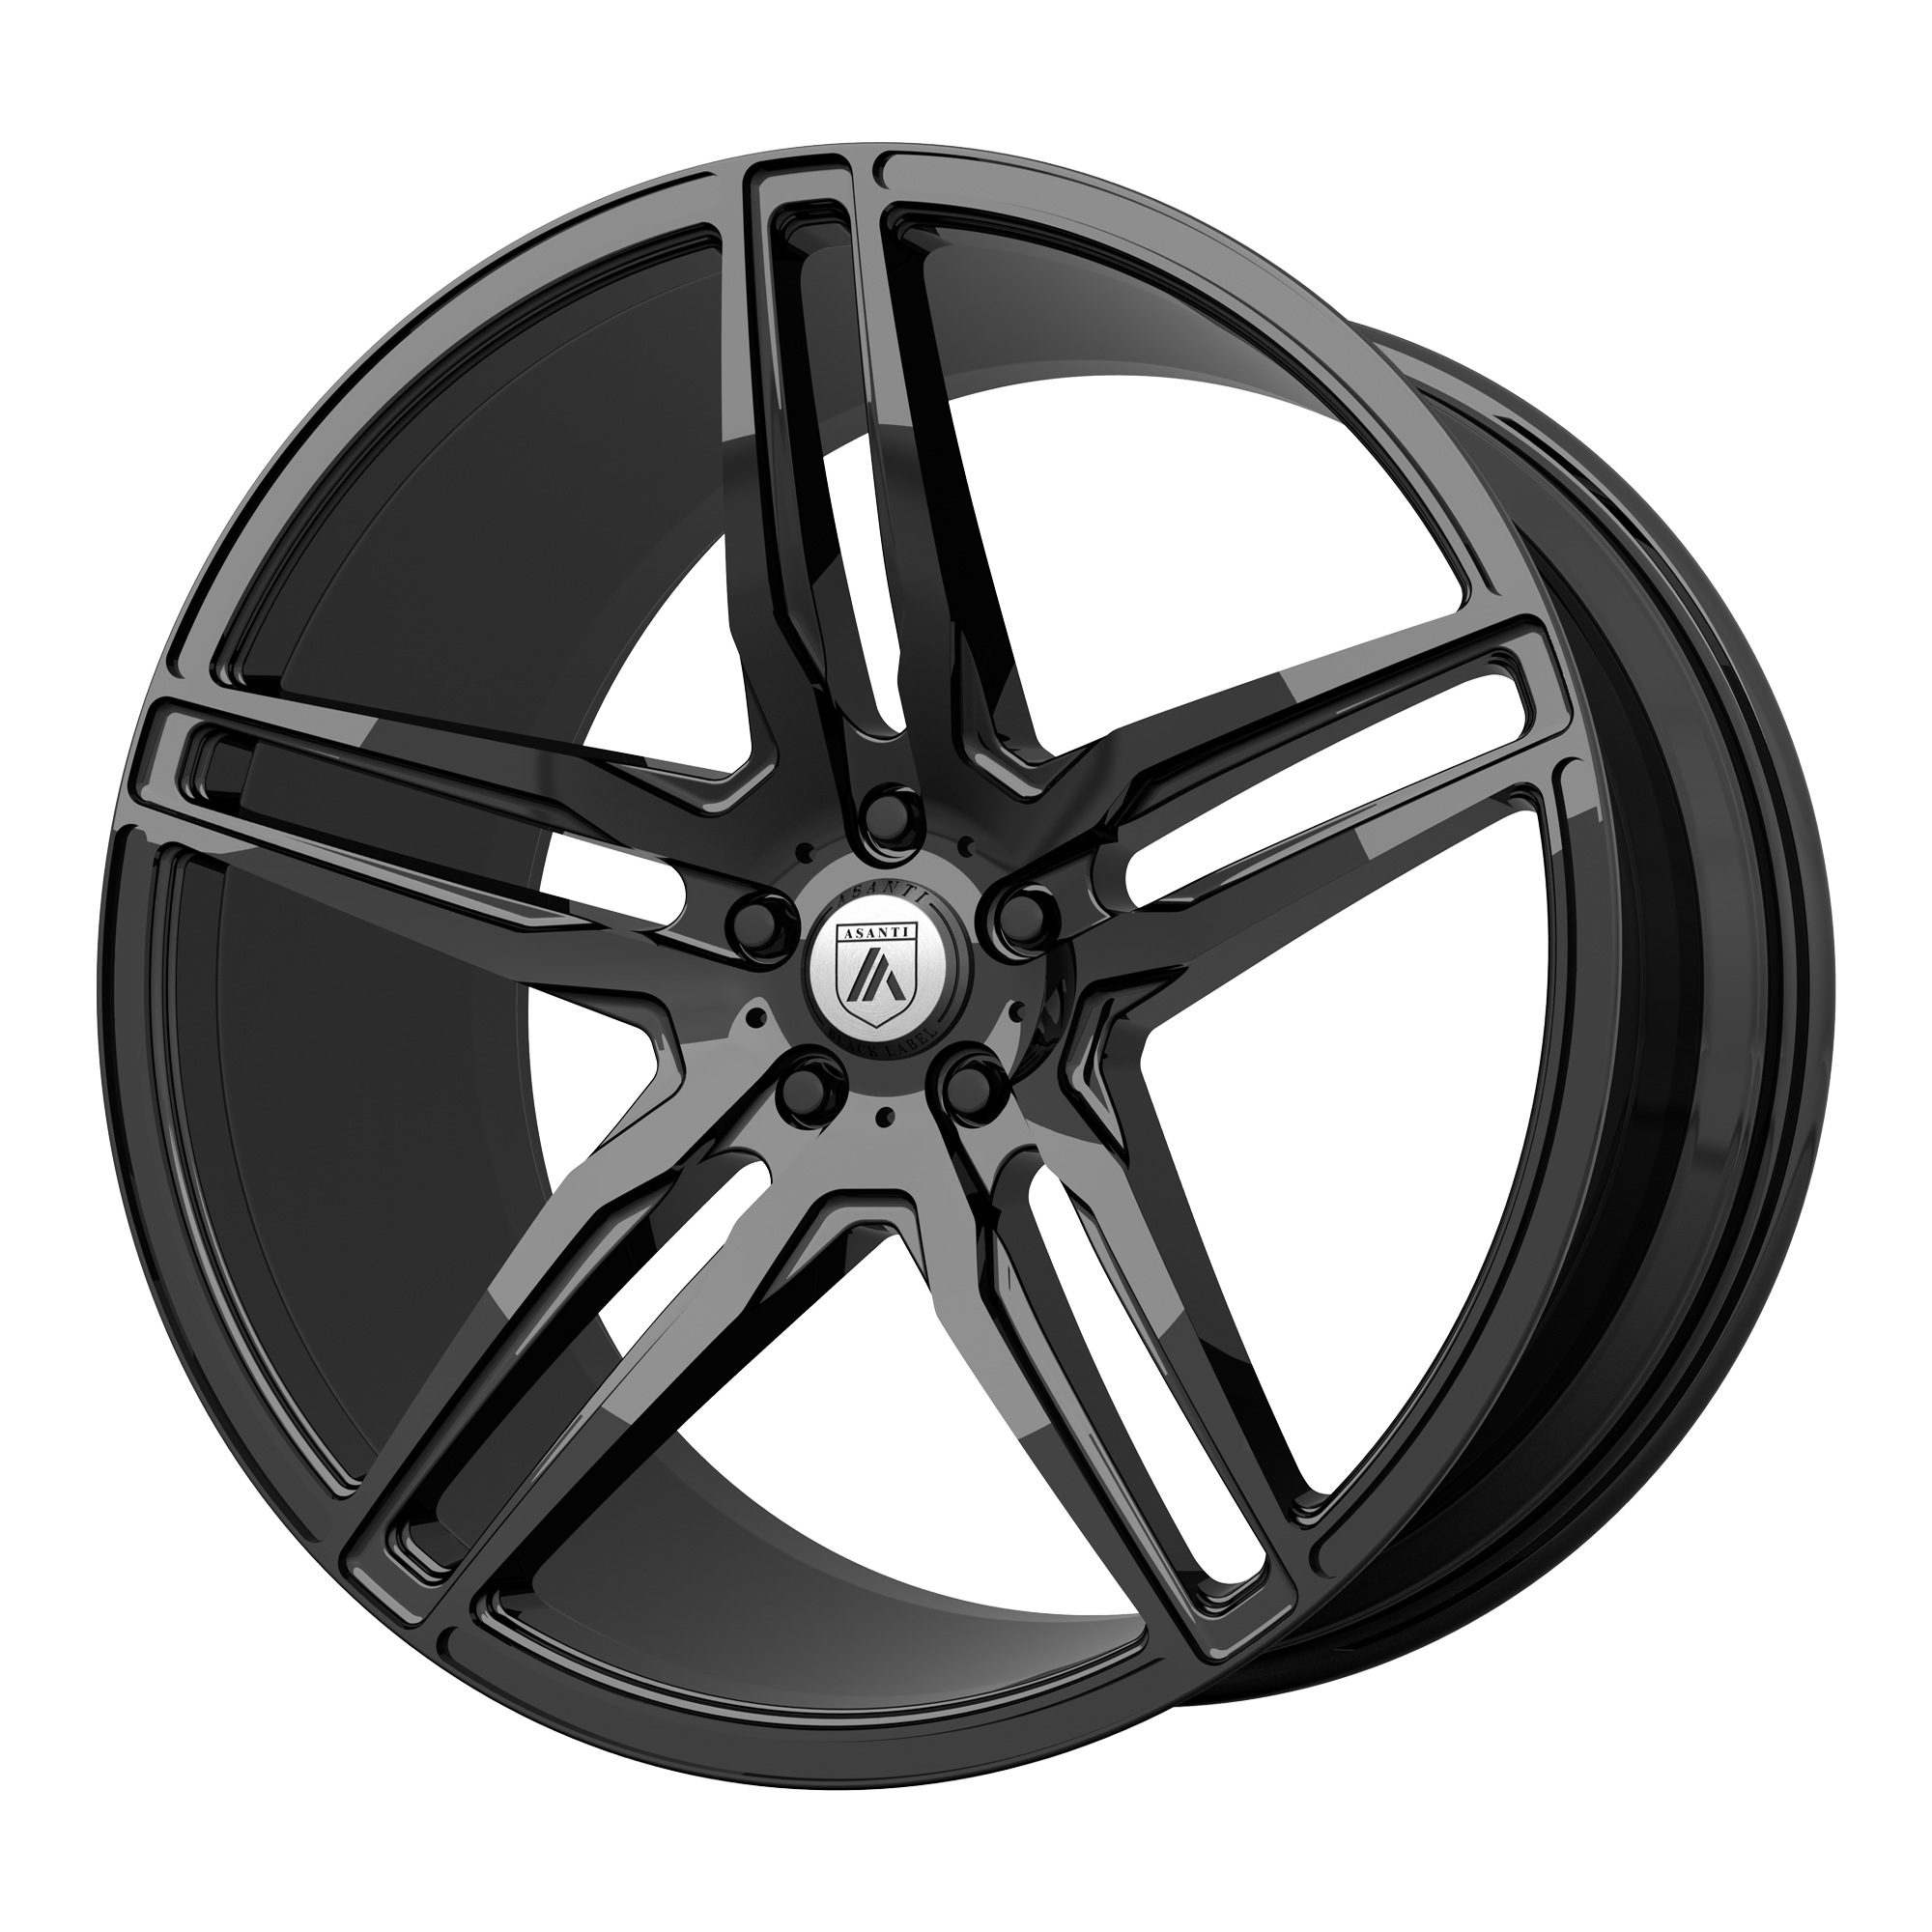 ORION 20x10.5 5x120.00 GLOSS BLACK (38 mm) - Tires and Engine Performance